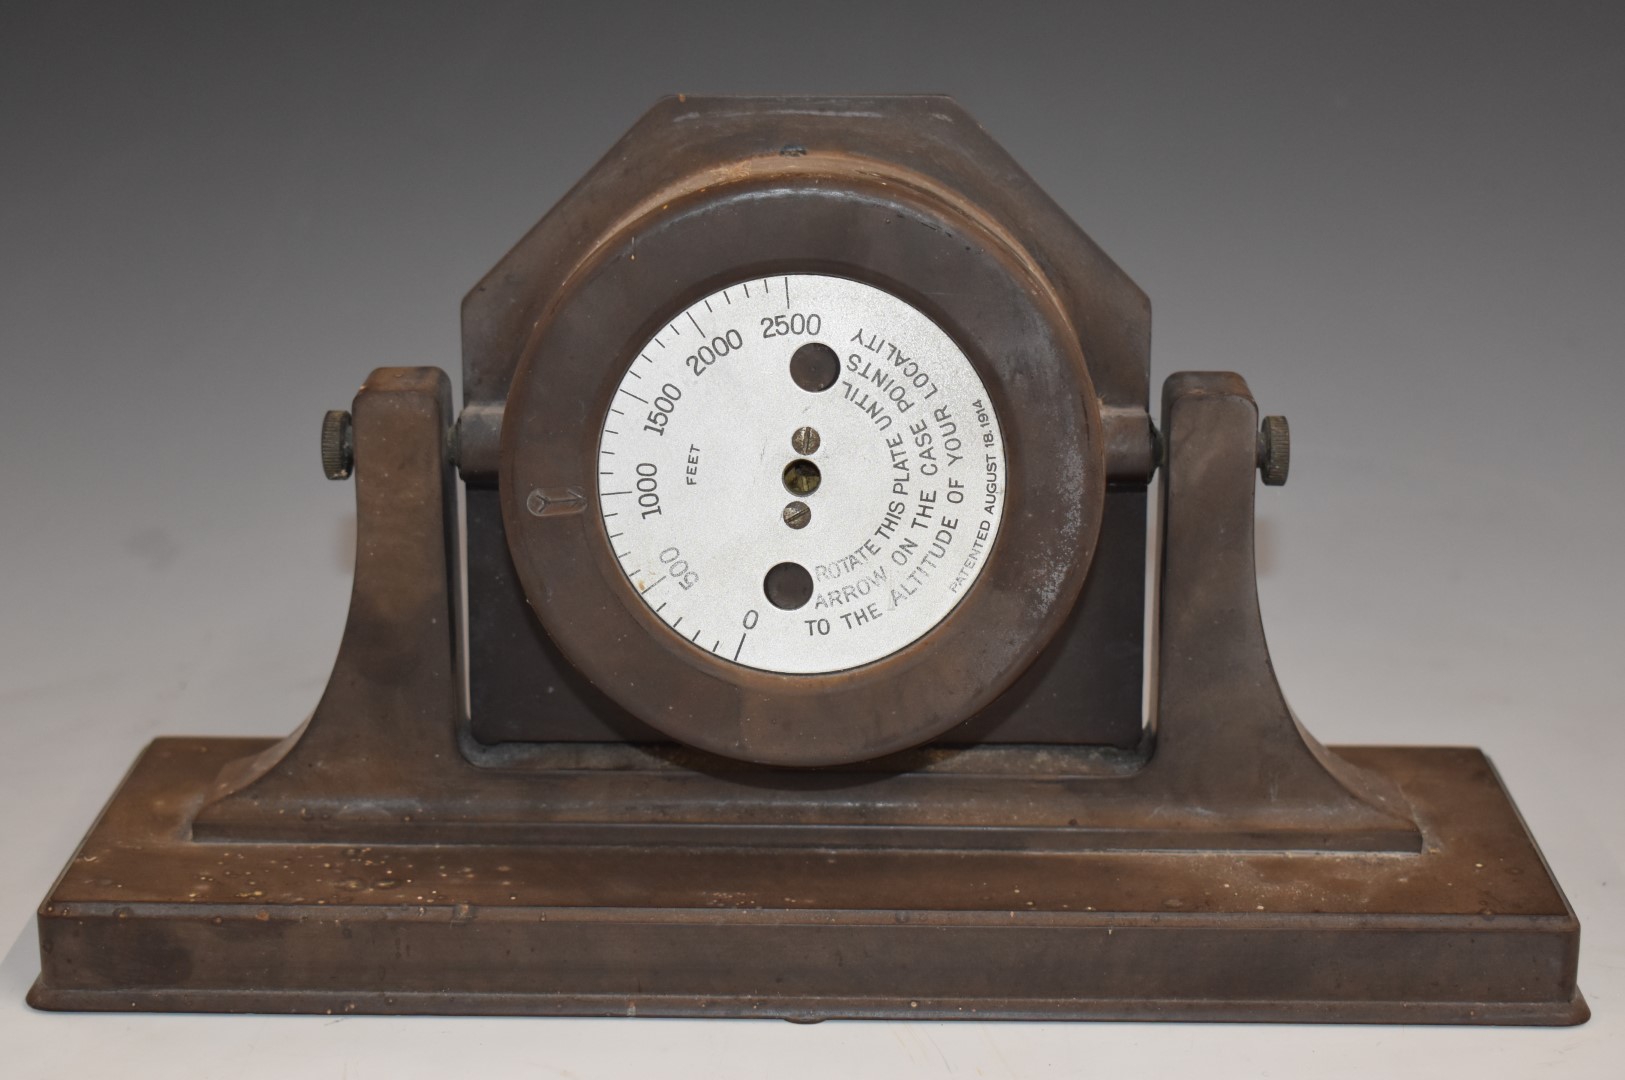 Short & Mason Stormoguide barometer in Art Deco style Bakelite case, also marked to dial C.W.Dixey & - Image 3 of 3